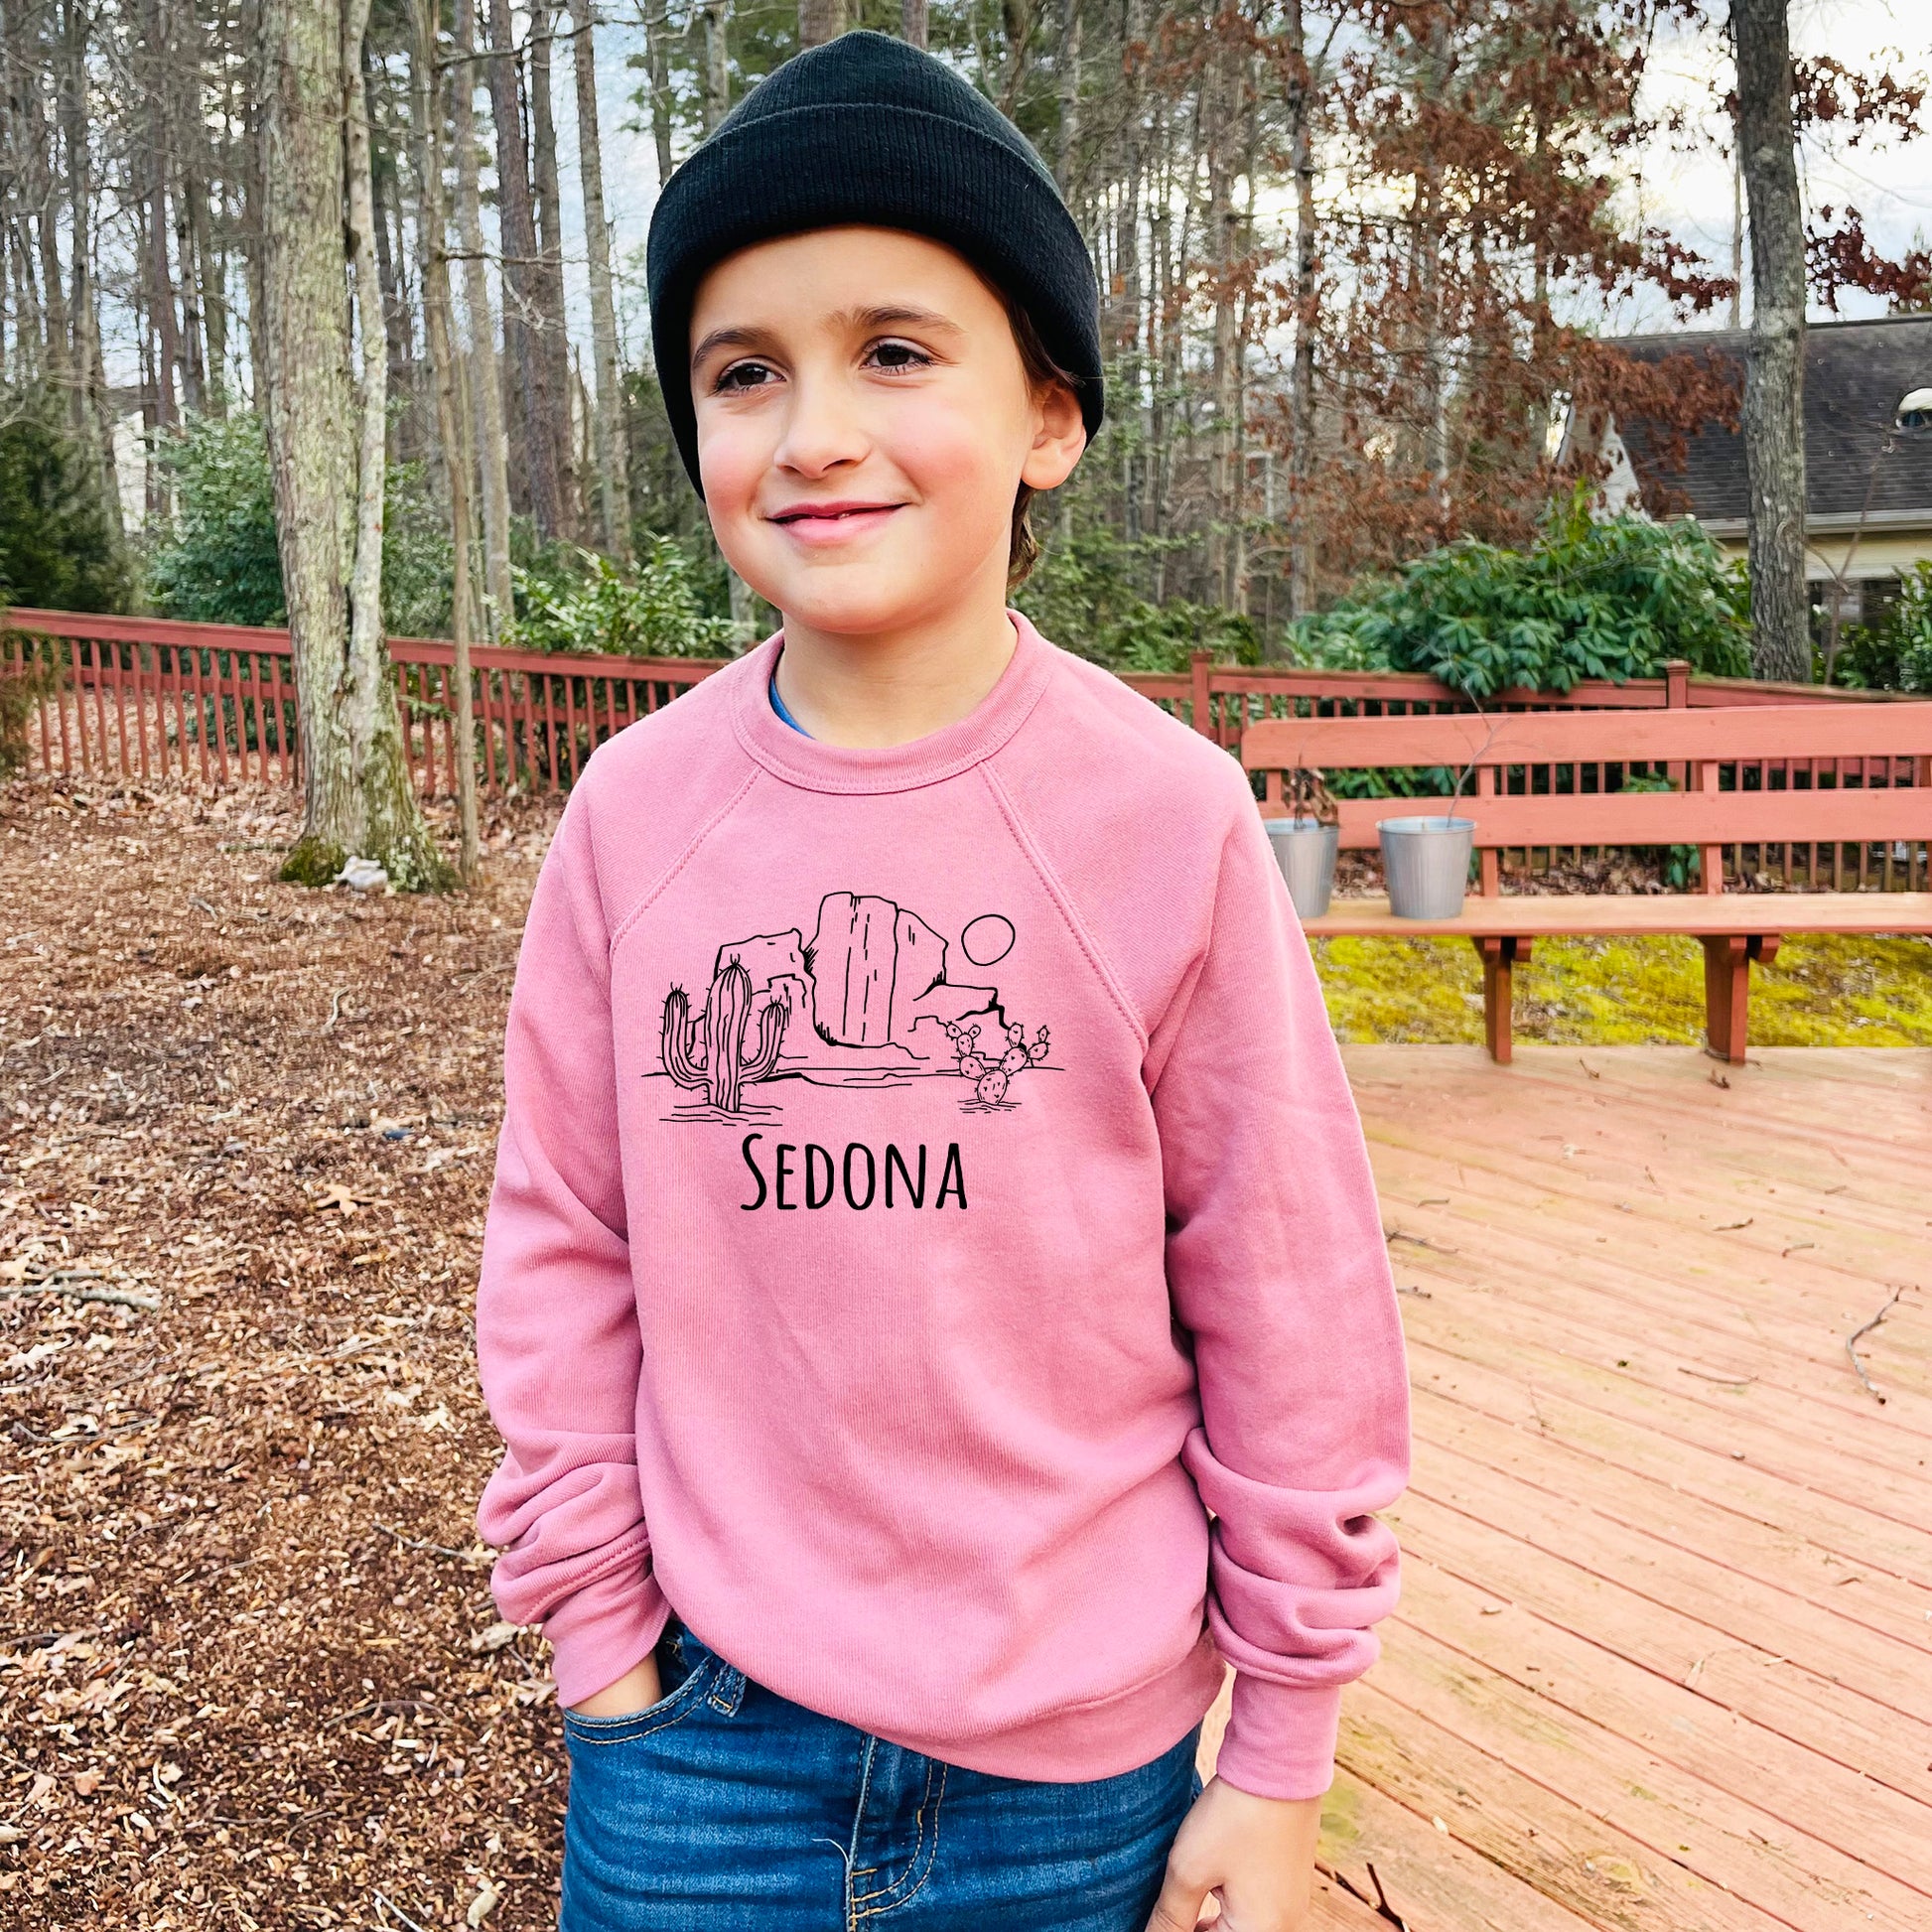 a young boy standing on a deck wearing a pink sweatshirt